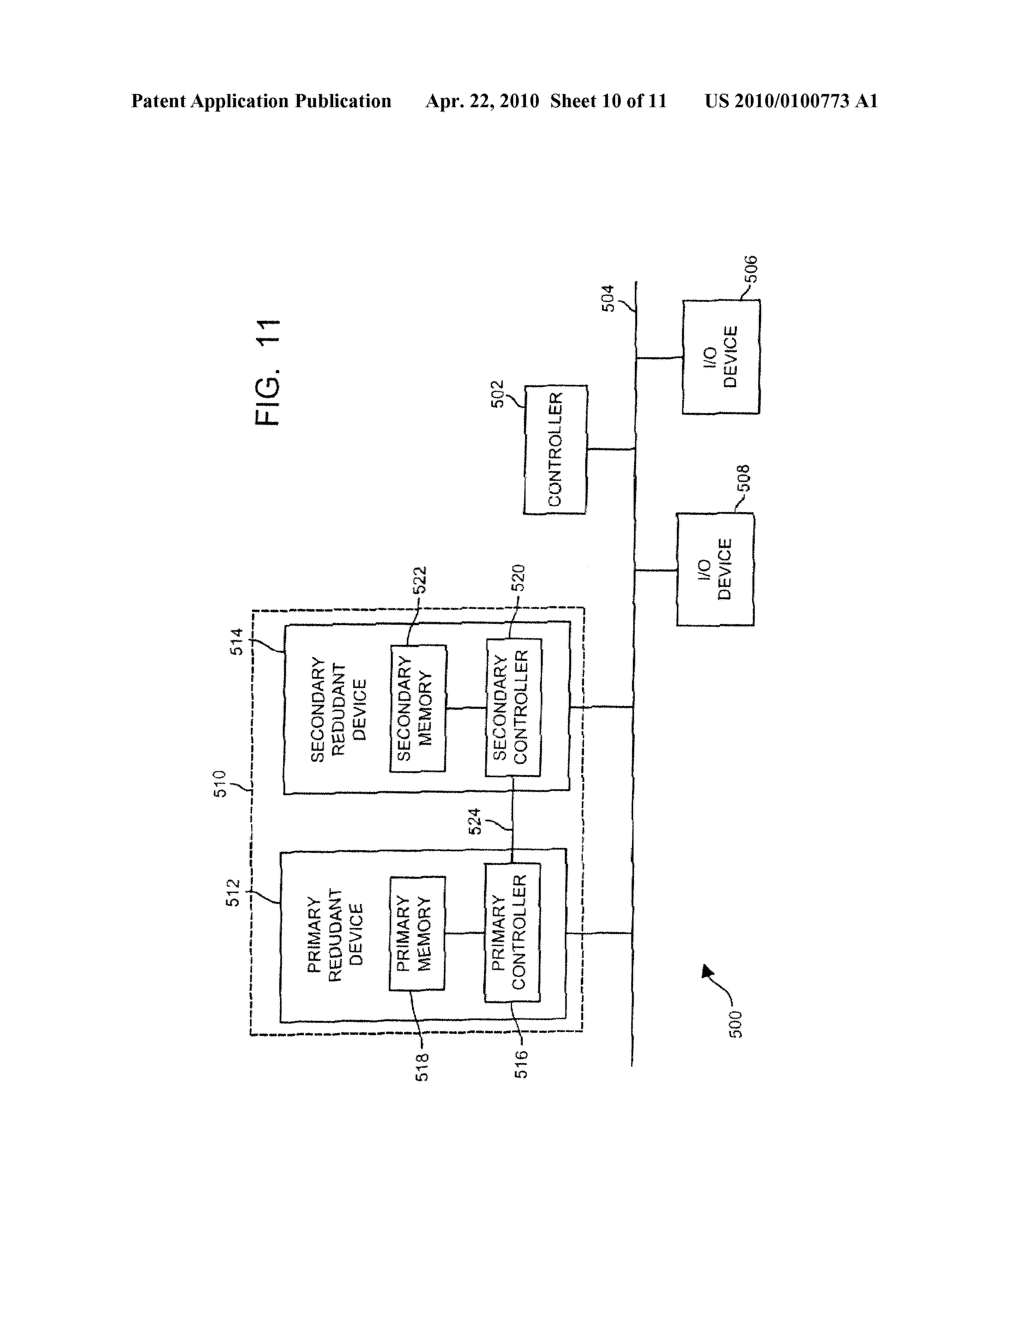 INPUT/OUTPUT DEVICE WITH CONFIGURATION, FAULT ISOLATION AND REDUNDANT FAULT ASSIST FUNCTIONALITY - diagram, schematic, and image 11